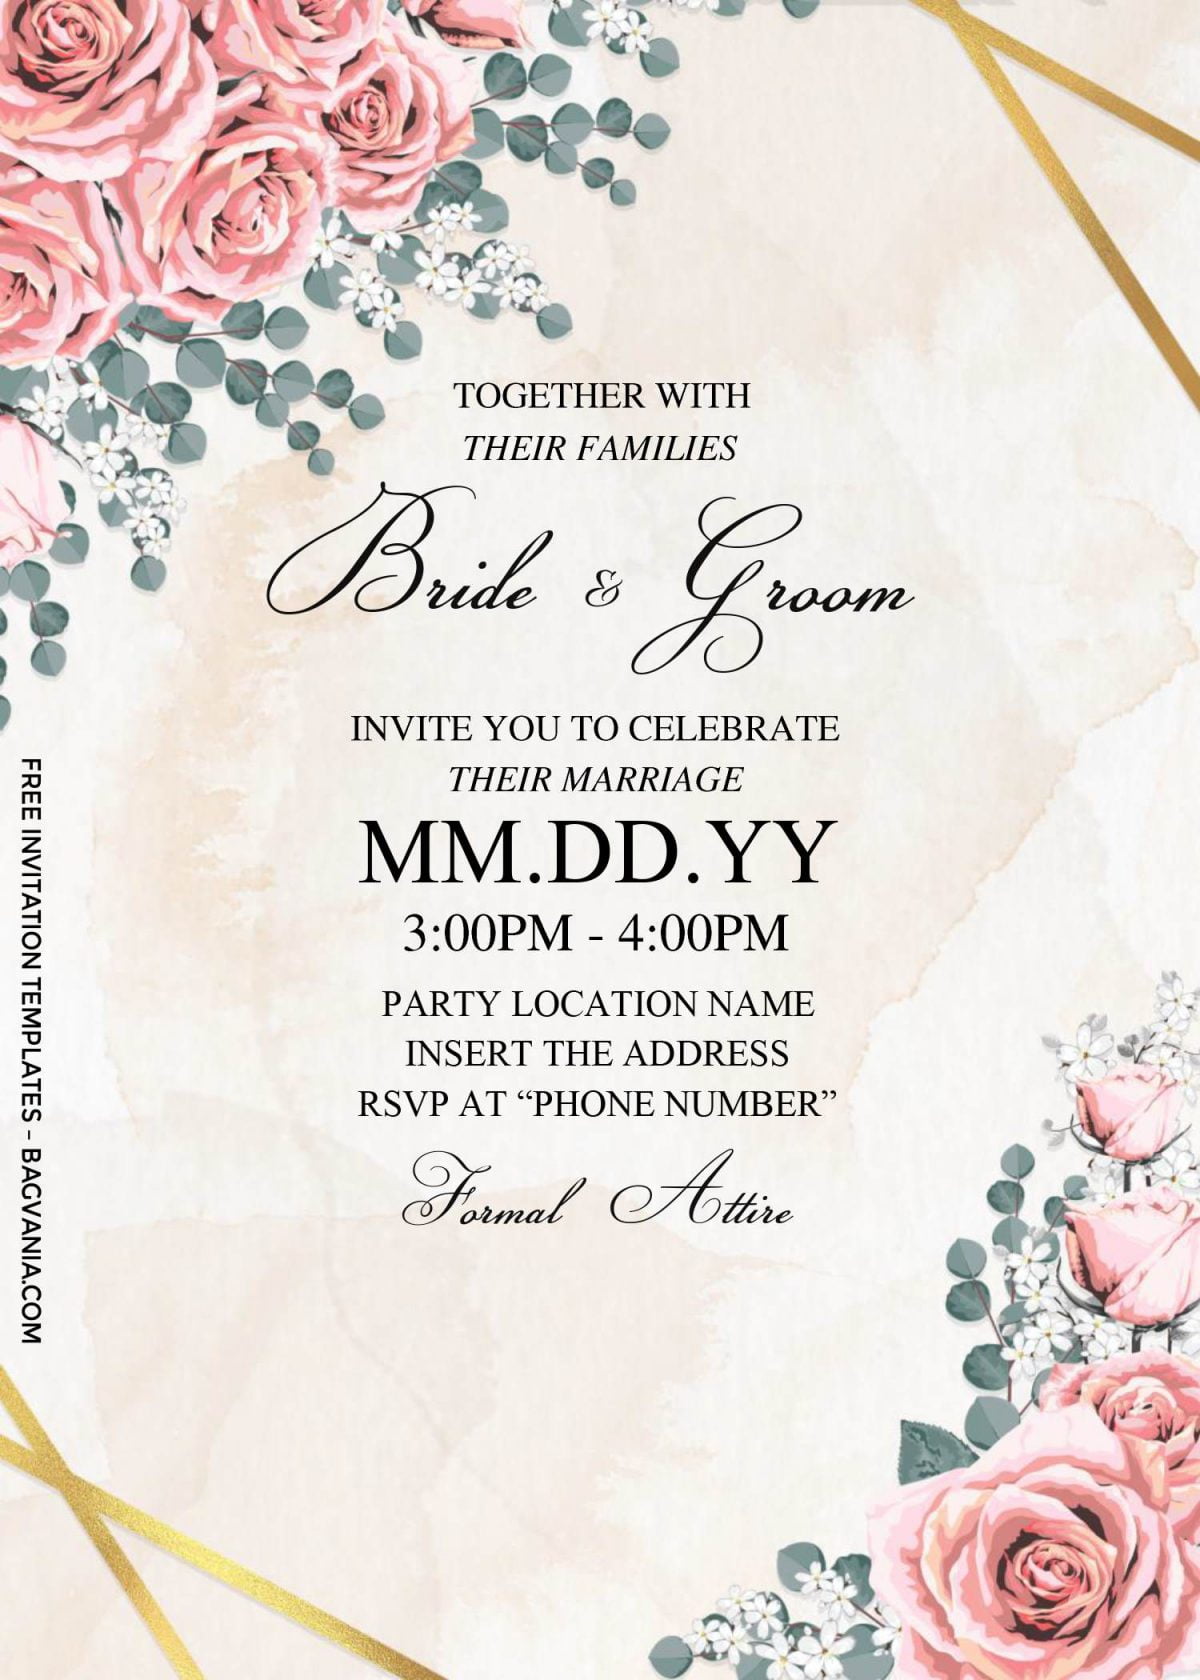 Free Dusty Rose Wedding Invitation Templates For Word and has rustic vintage style background